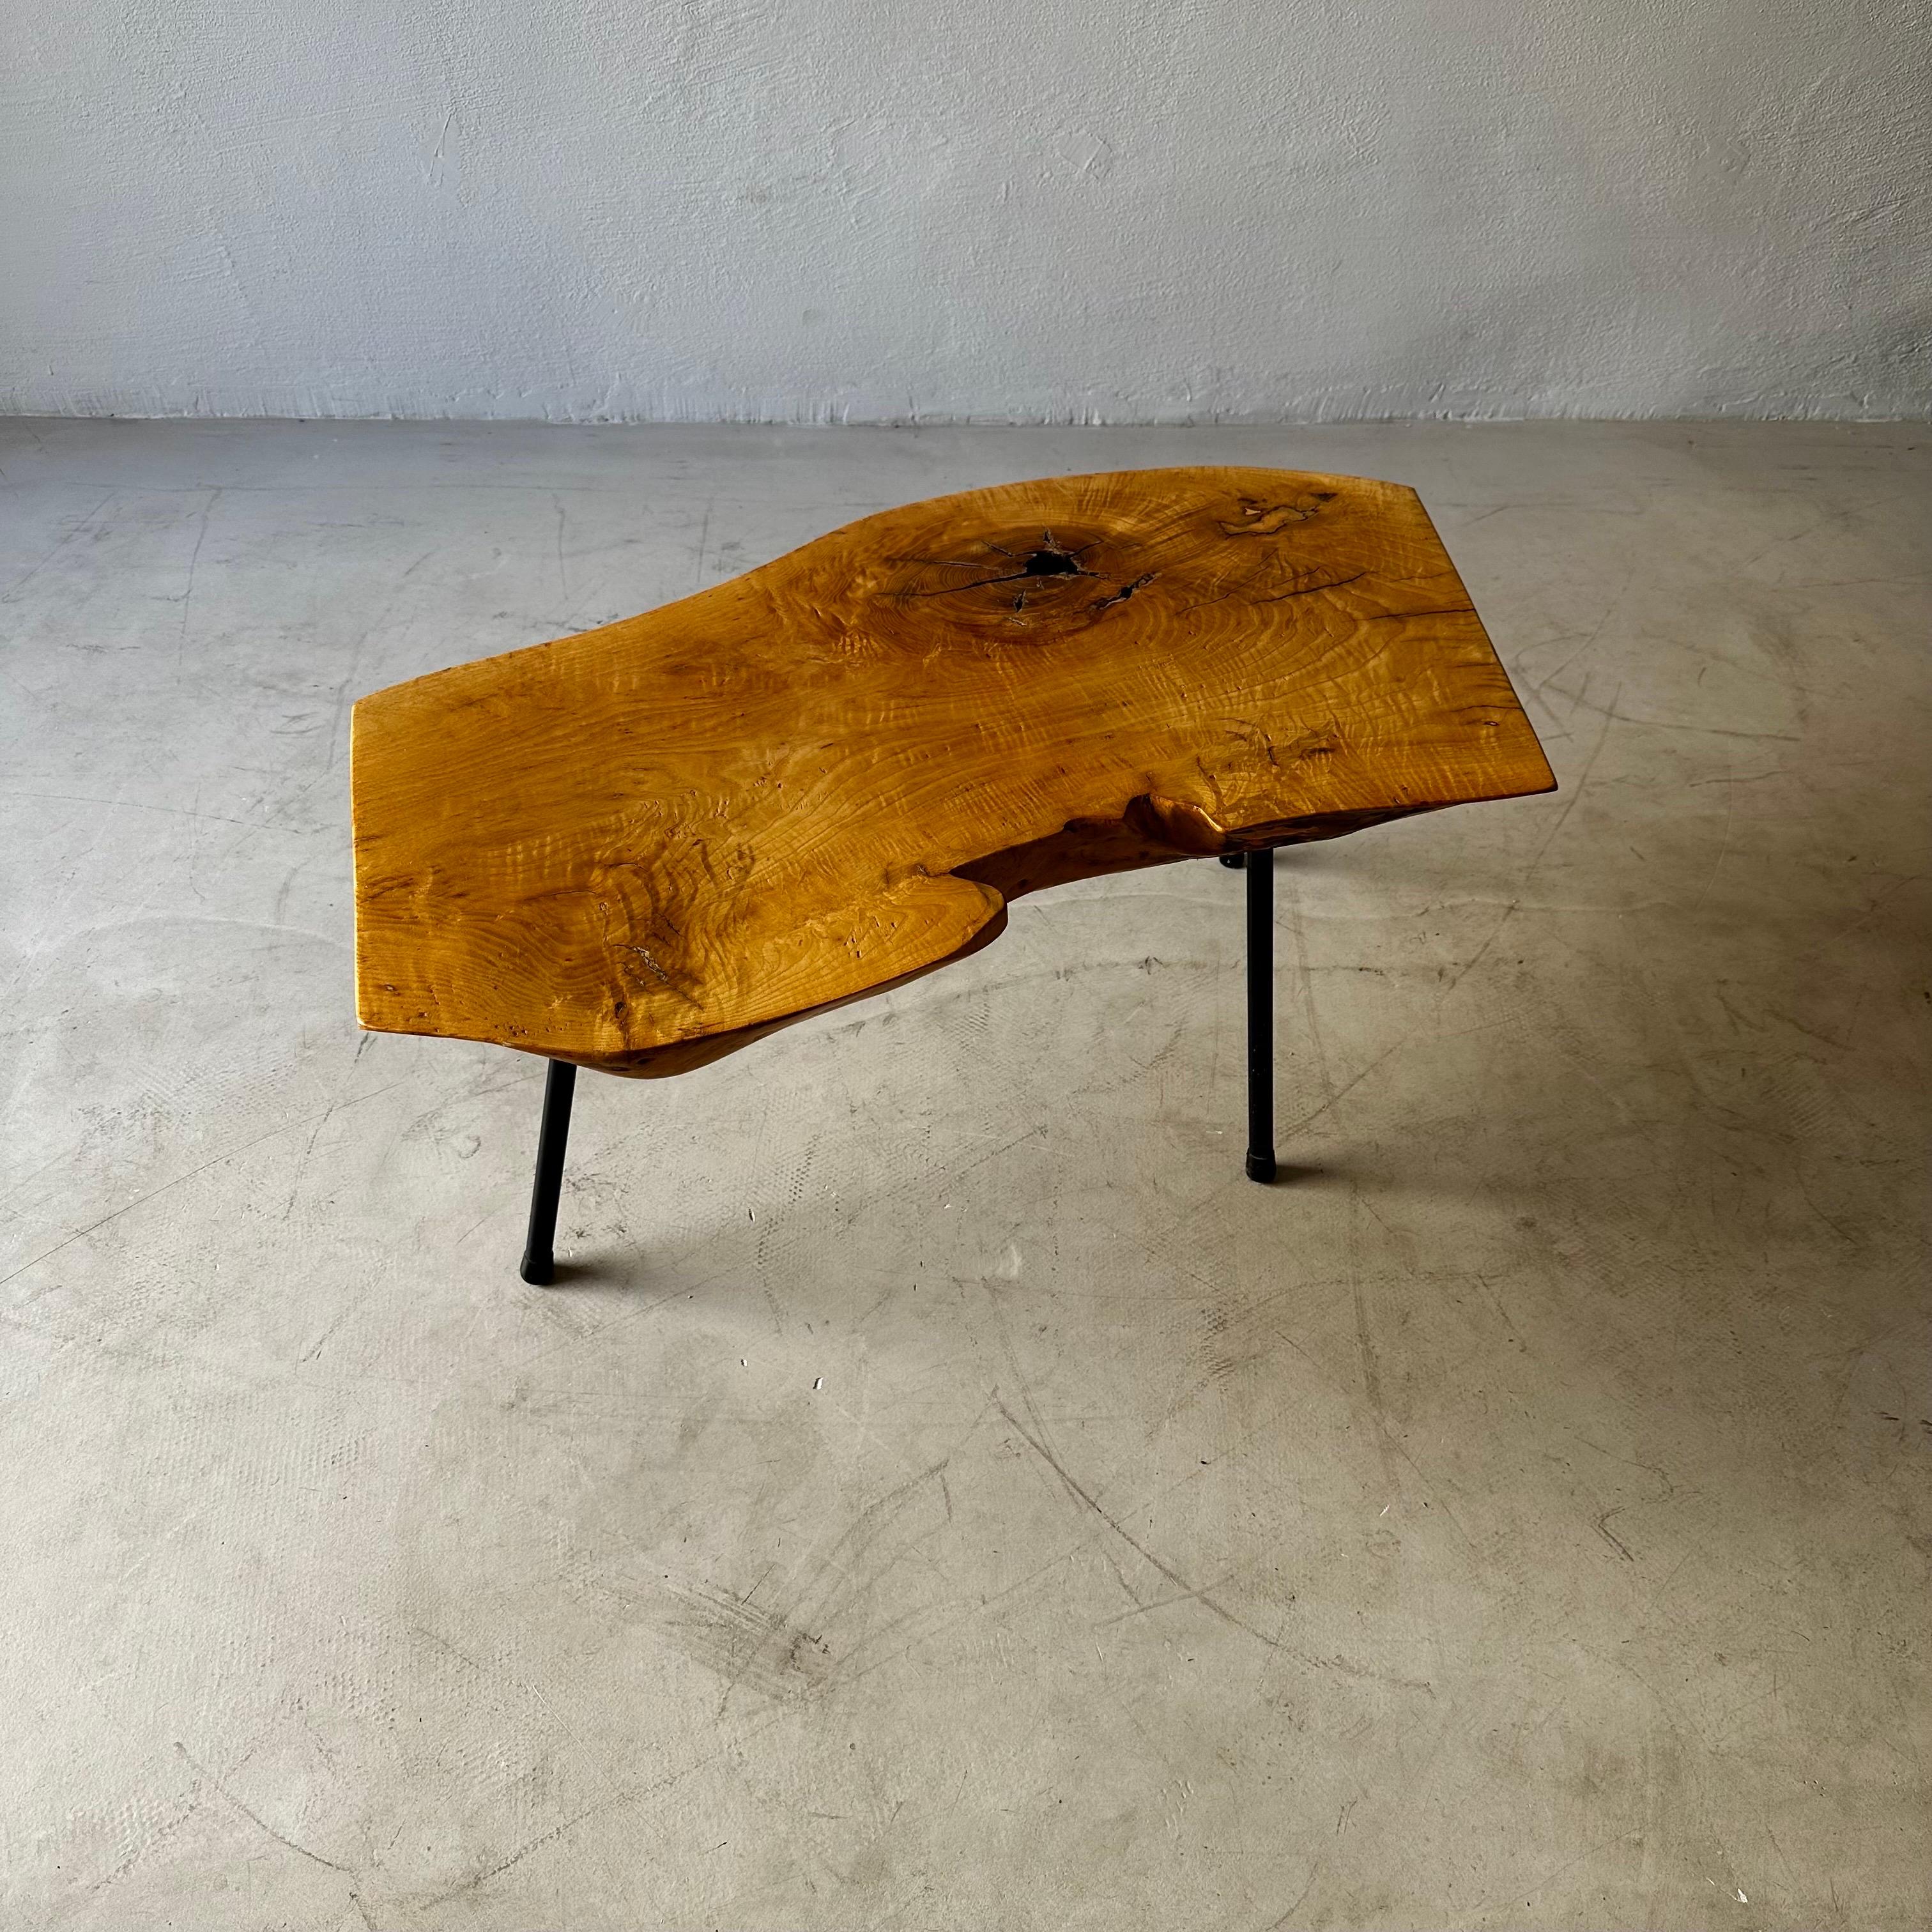 Midcentury live edge tree trunk table, Austria 1965. Signed at the bottom, 1965.